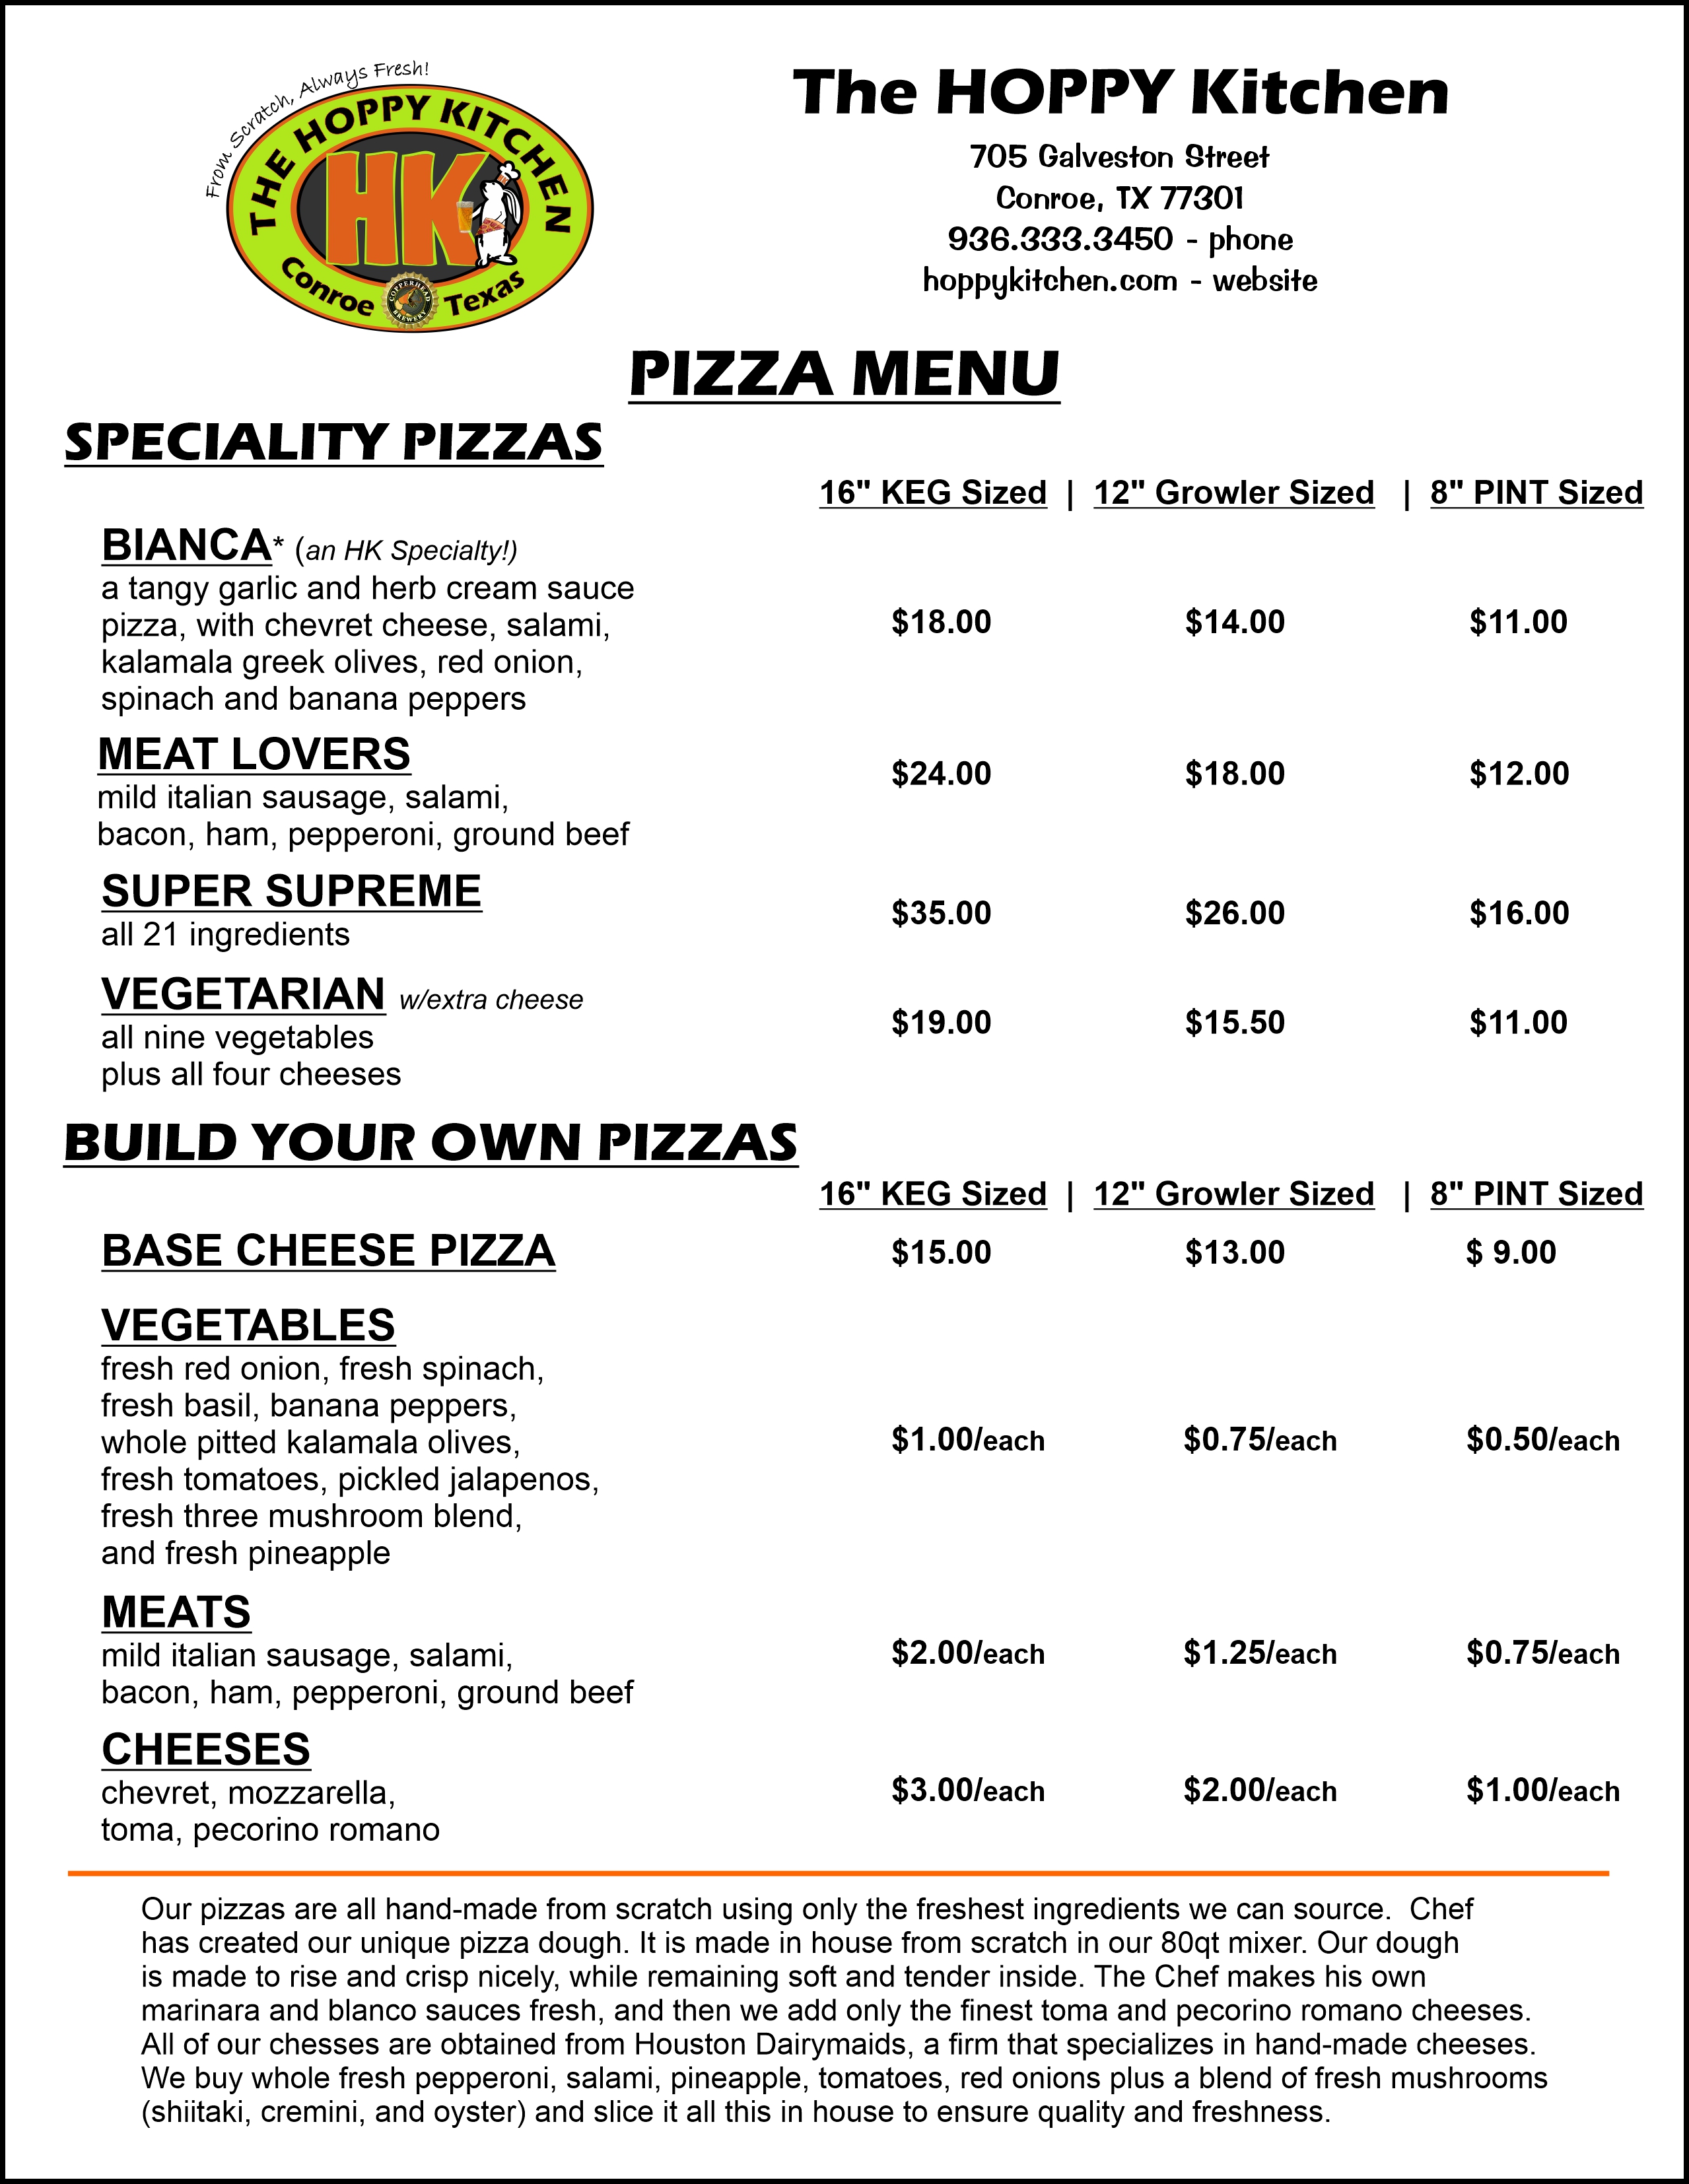 This is the current PIZZA menu for The HOPPY Kitchen